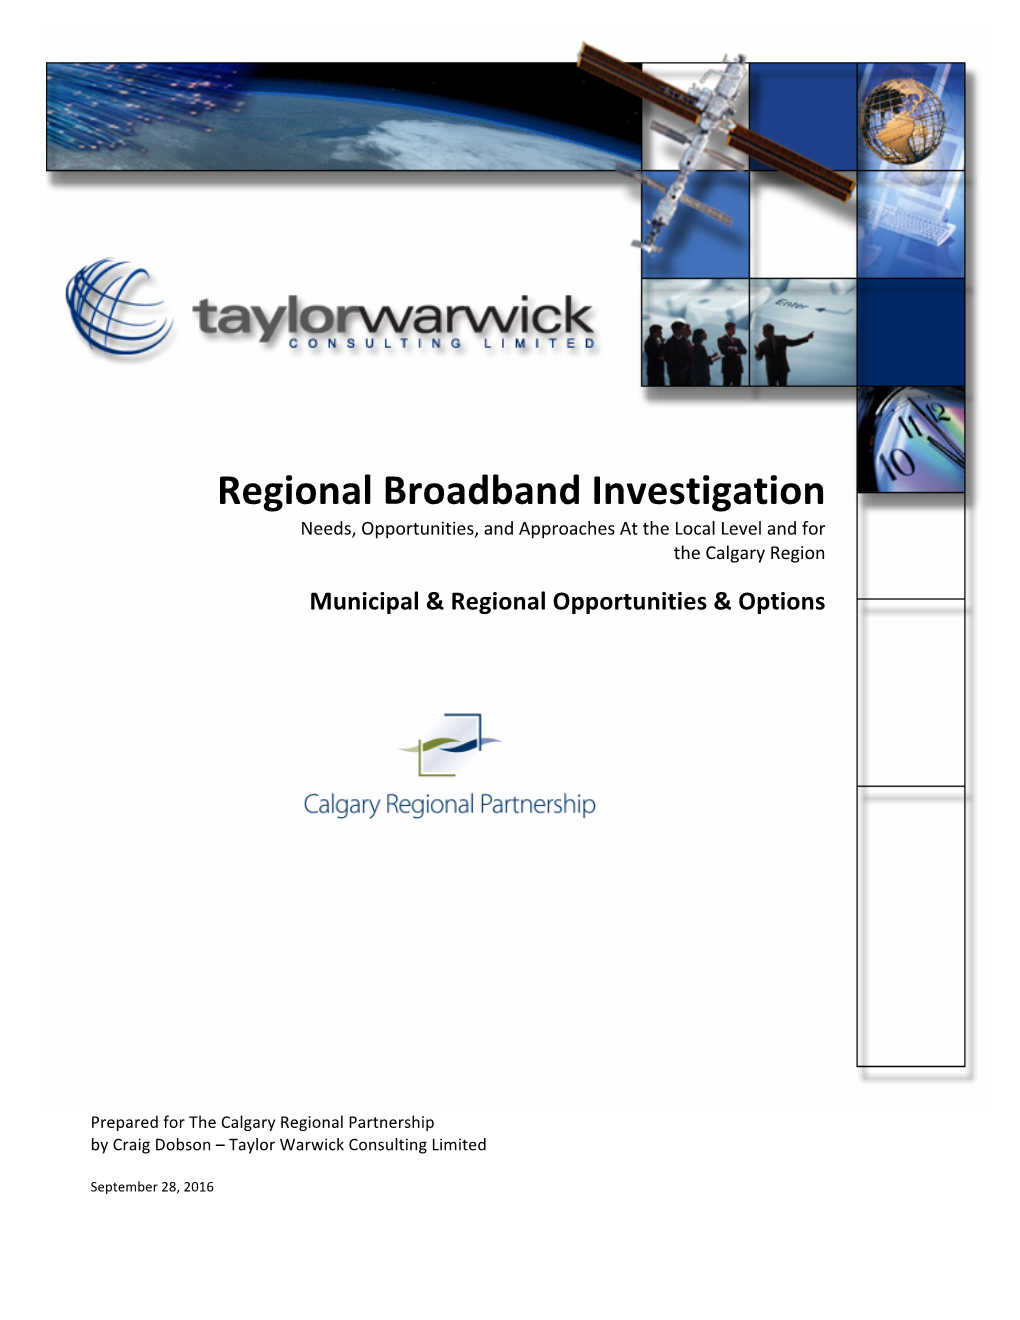 Regional Broadband Investigation Needs, Opportunities, and Approaches at the Local Level and for the Calgary Region Municipal & Regional Opportunities & Options